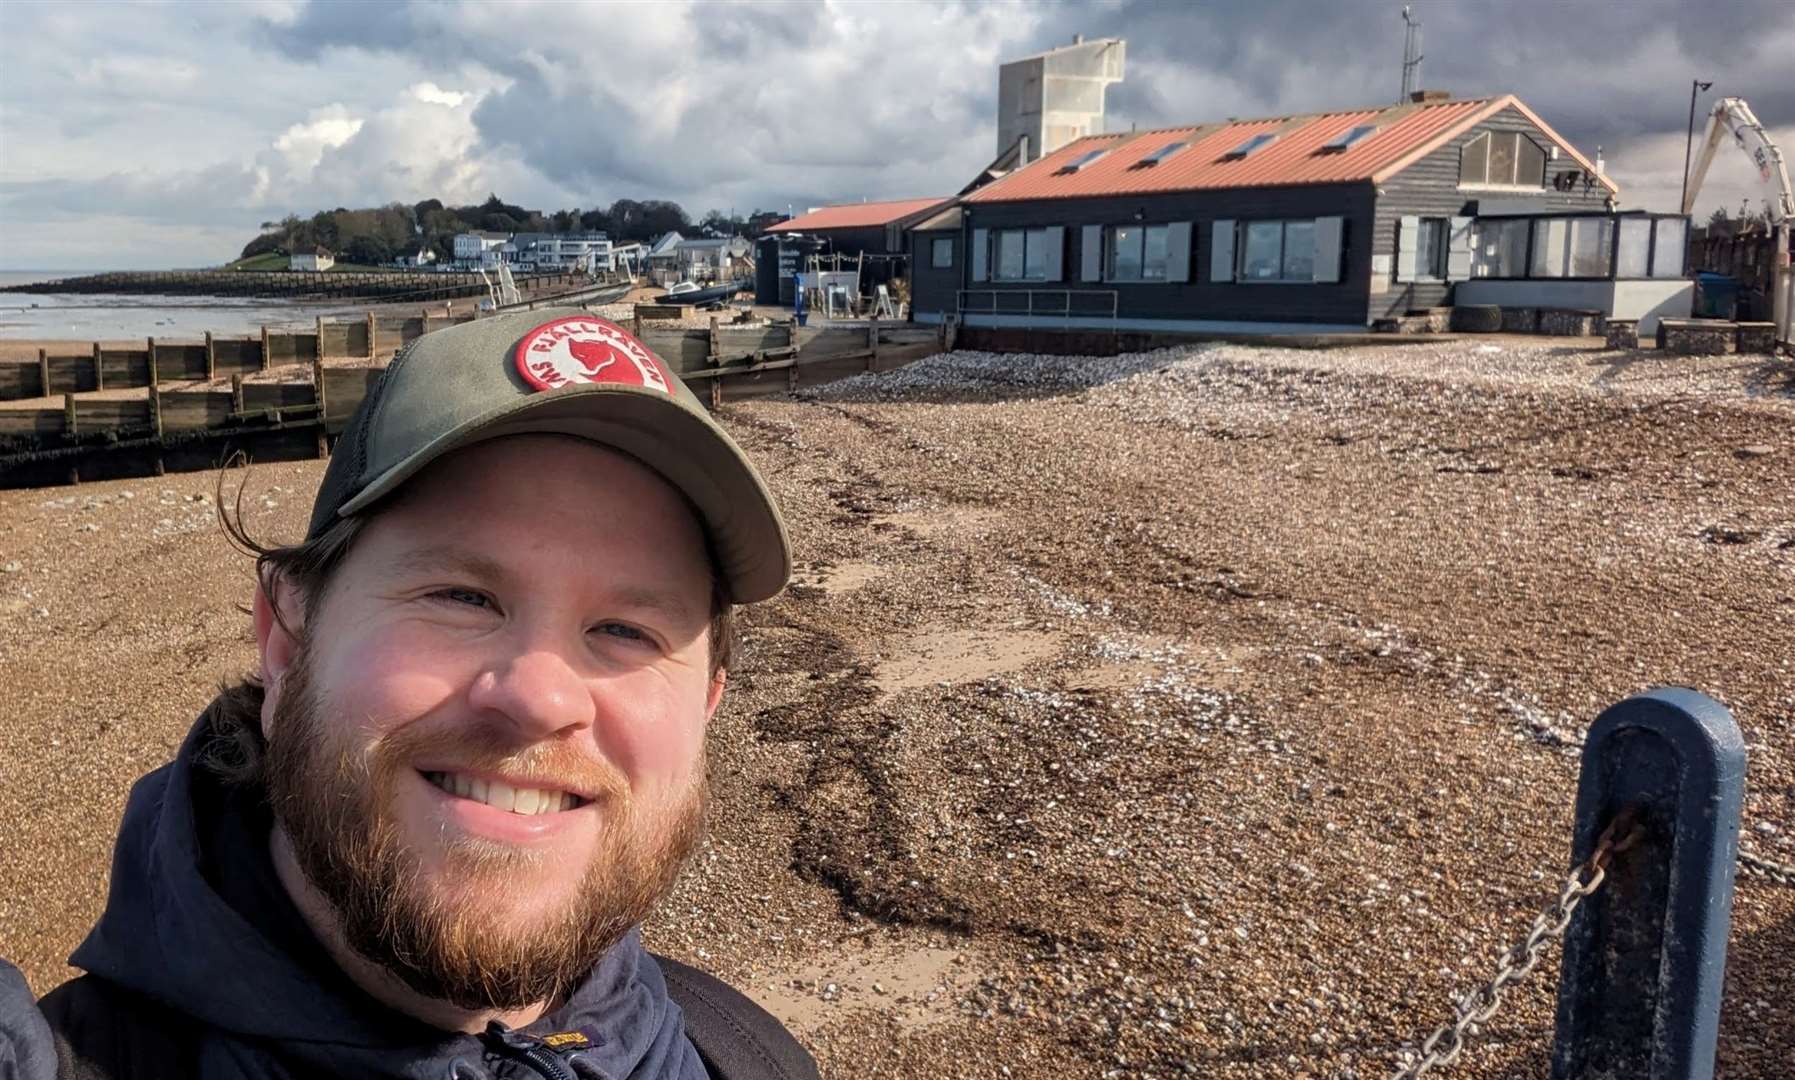 Reporter Rhys Griffiths on his arrival at Whitstable